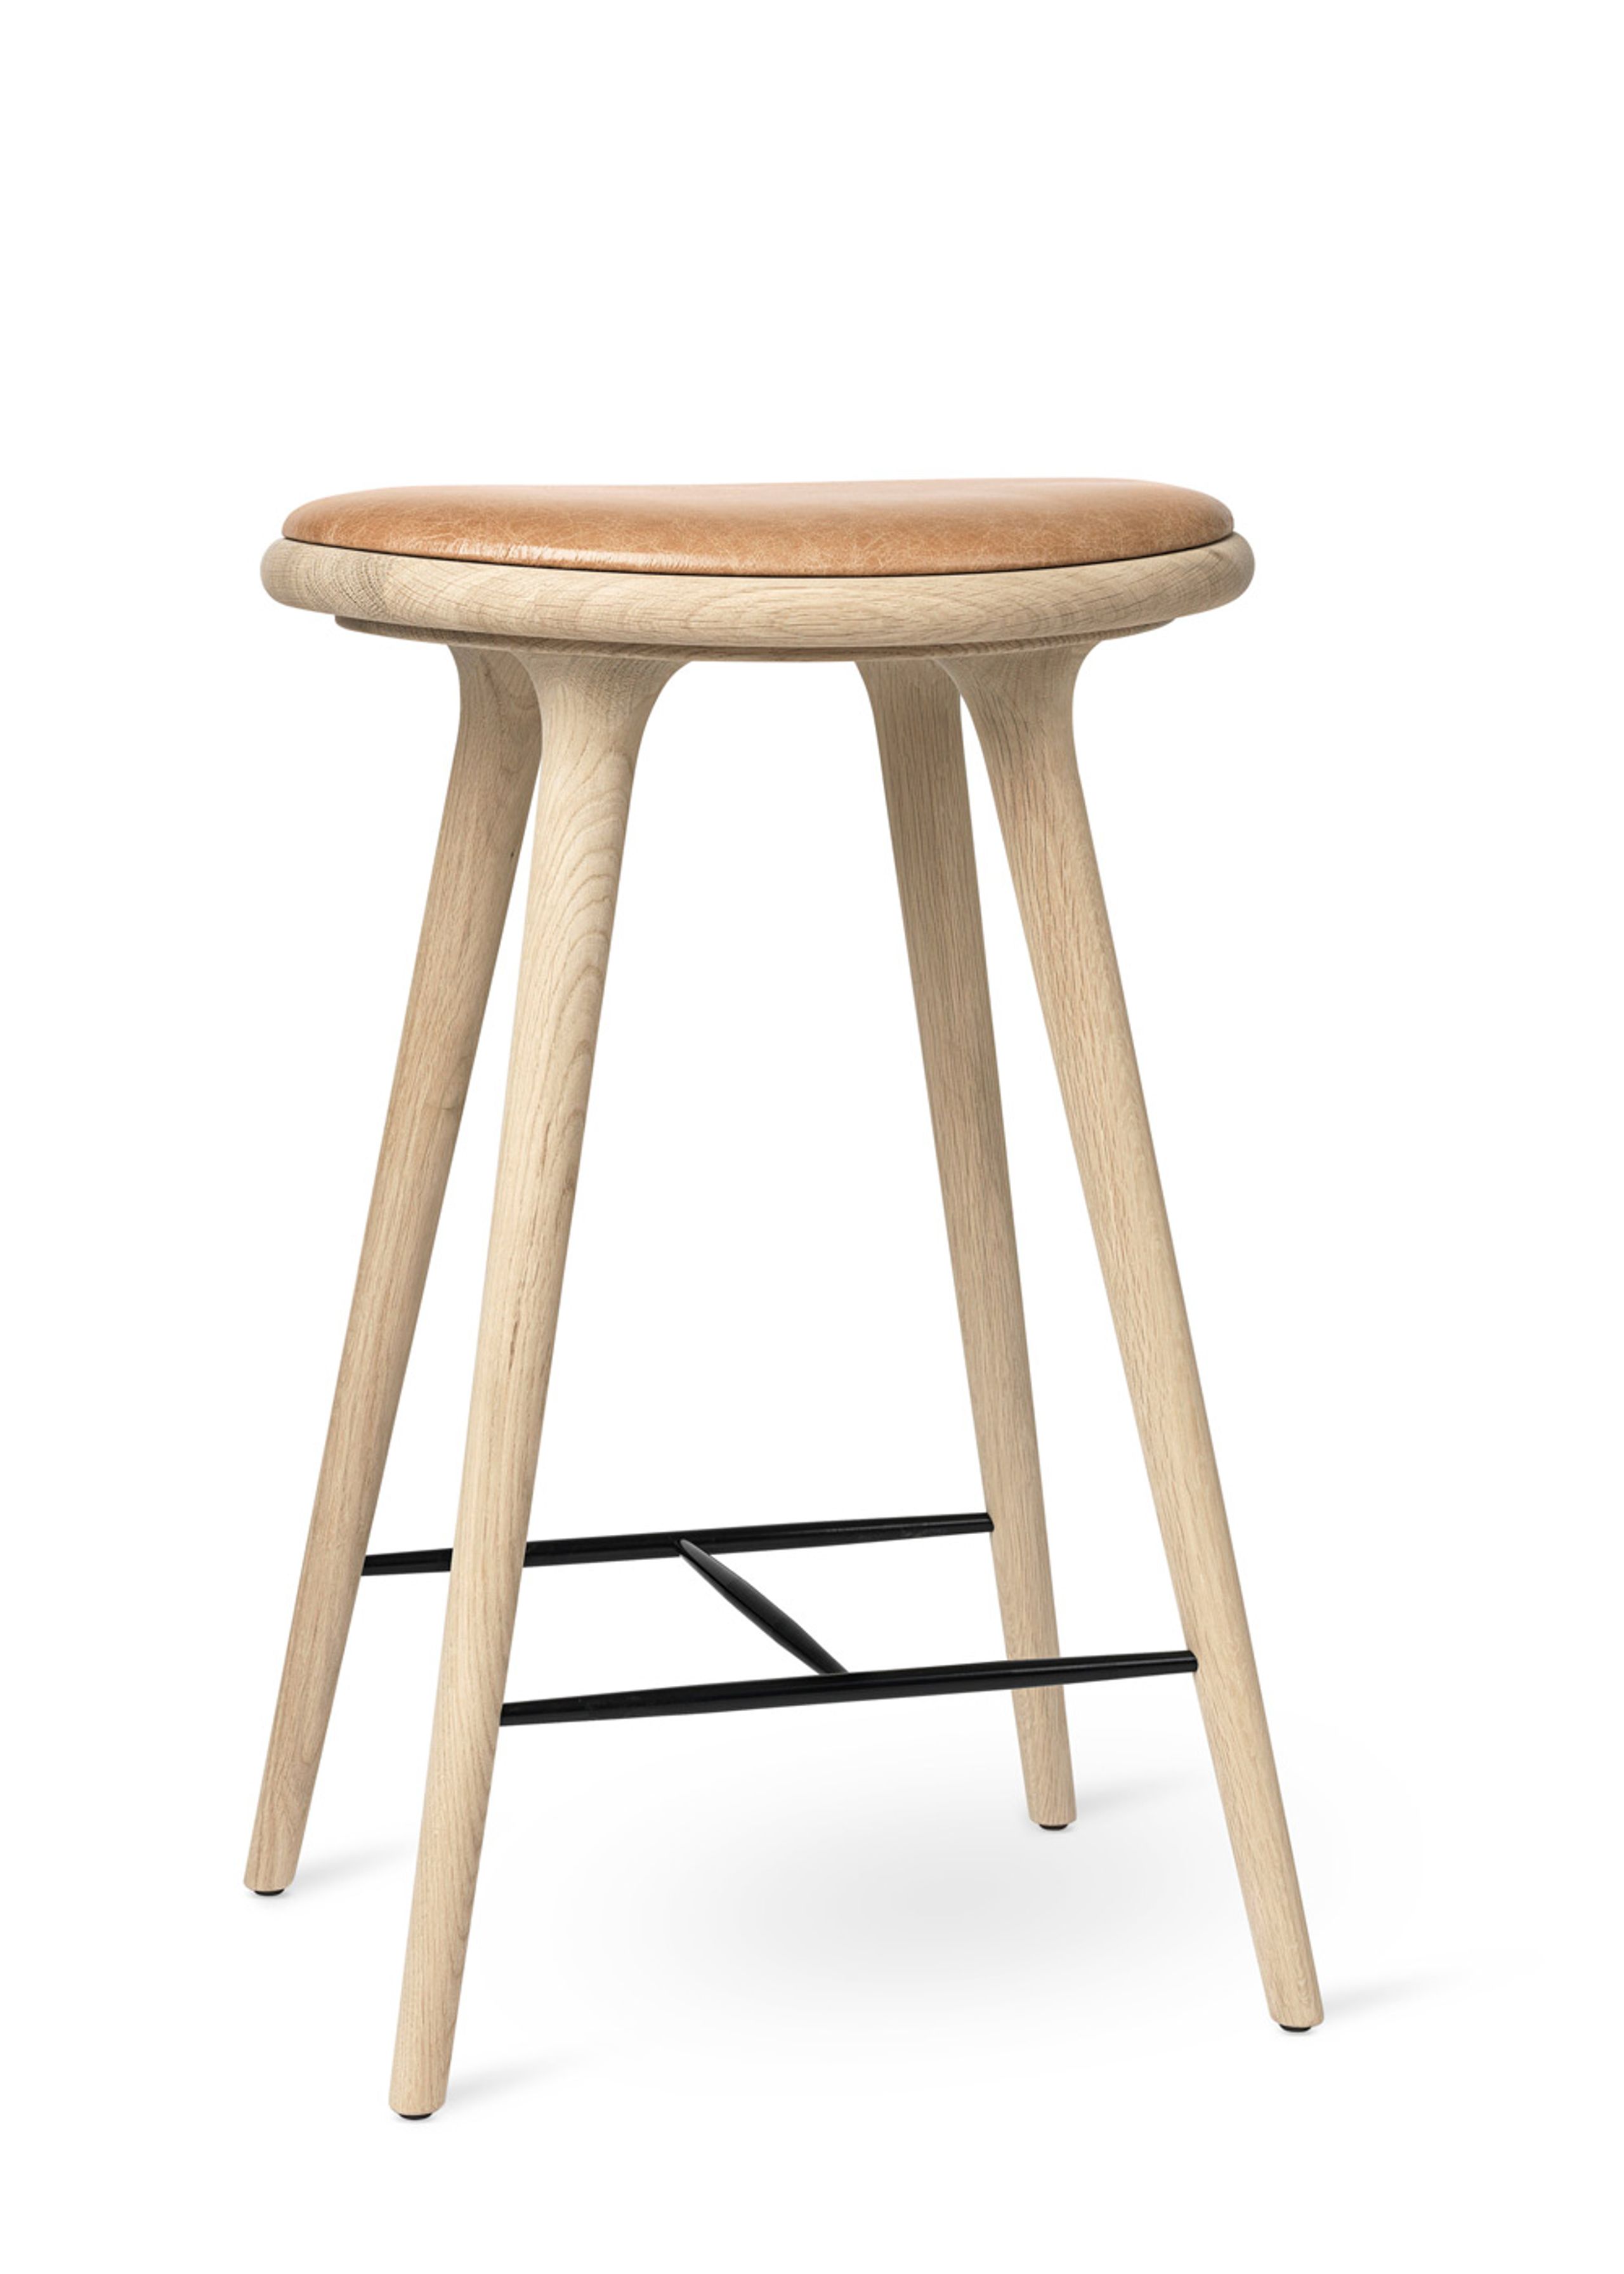 Mater - Chair - High Stool 69 - Soaped Oak